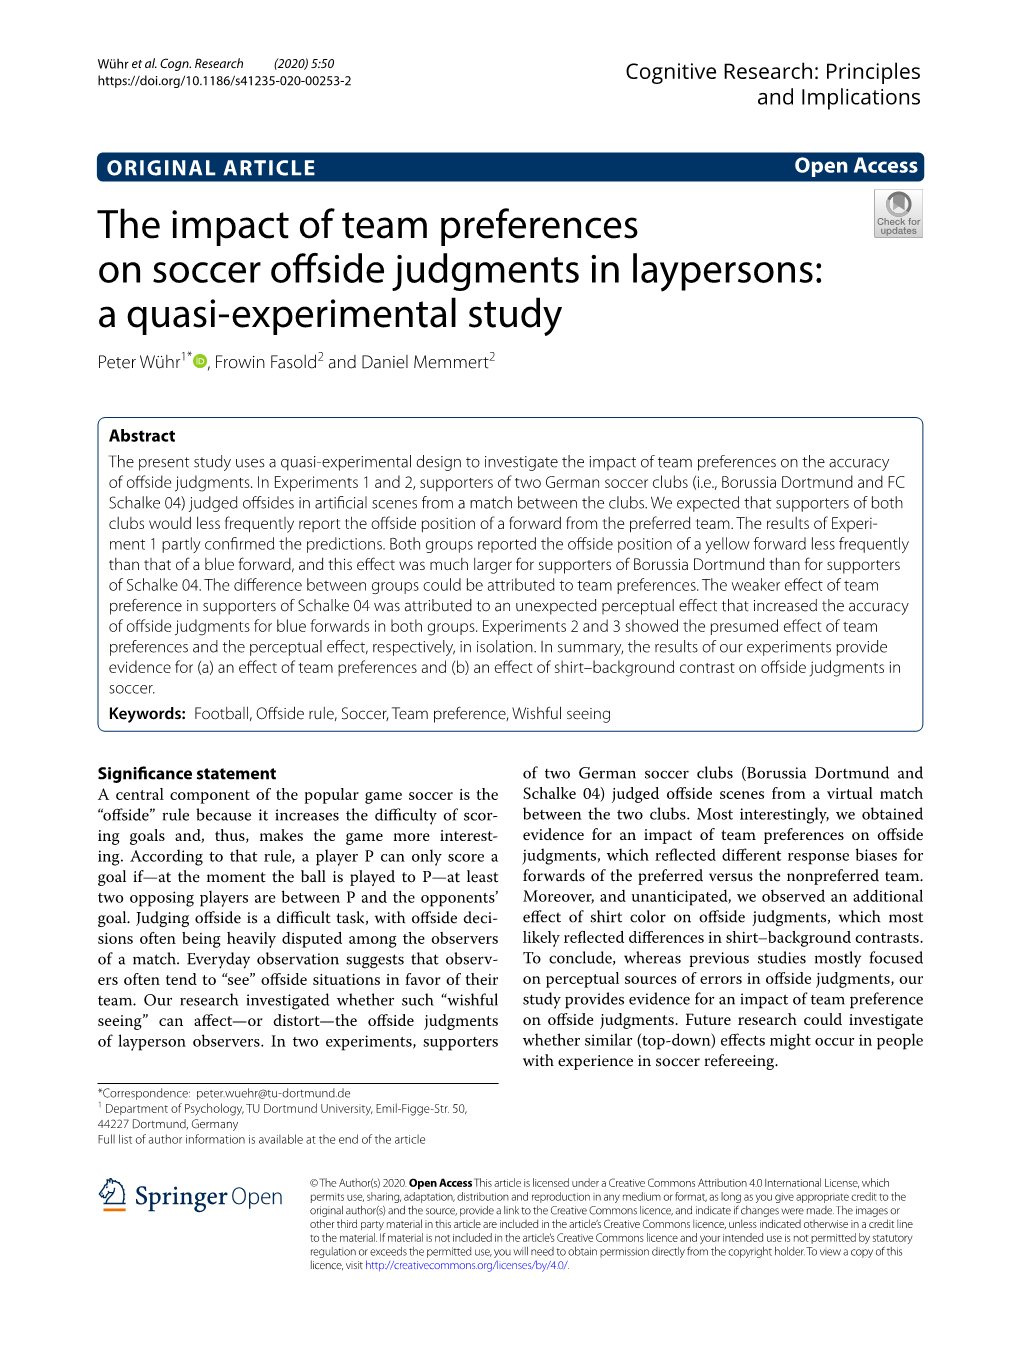 The Impact of Team Preferences on Soccer Offside Judgments In